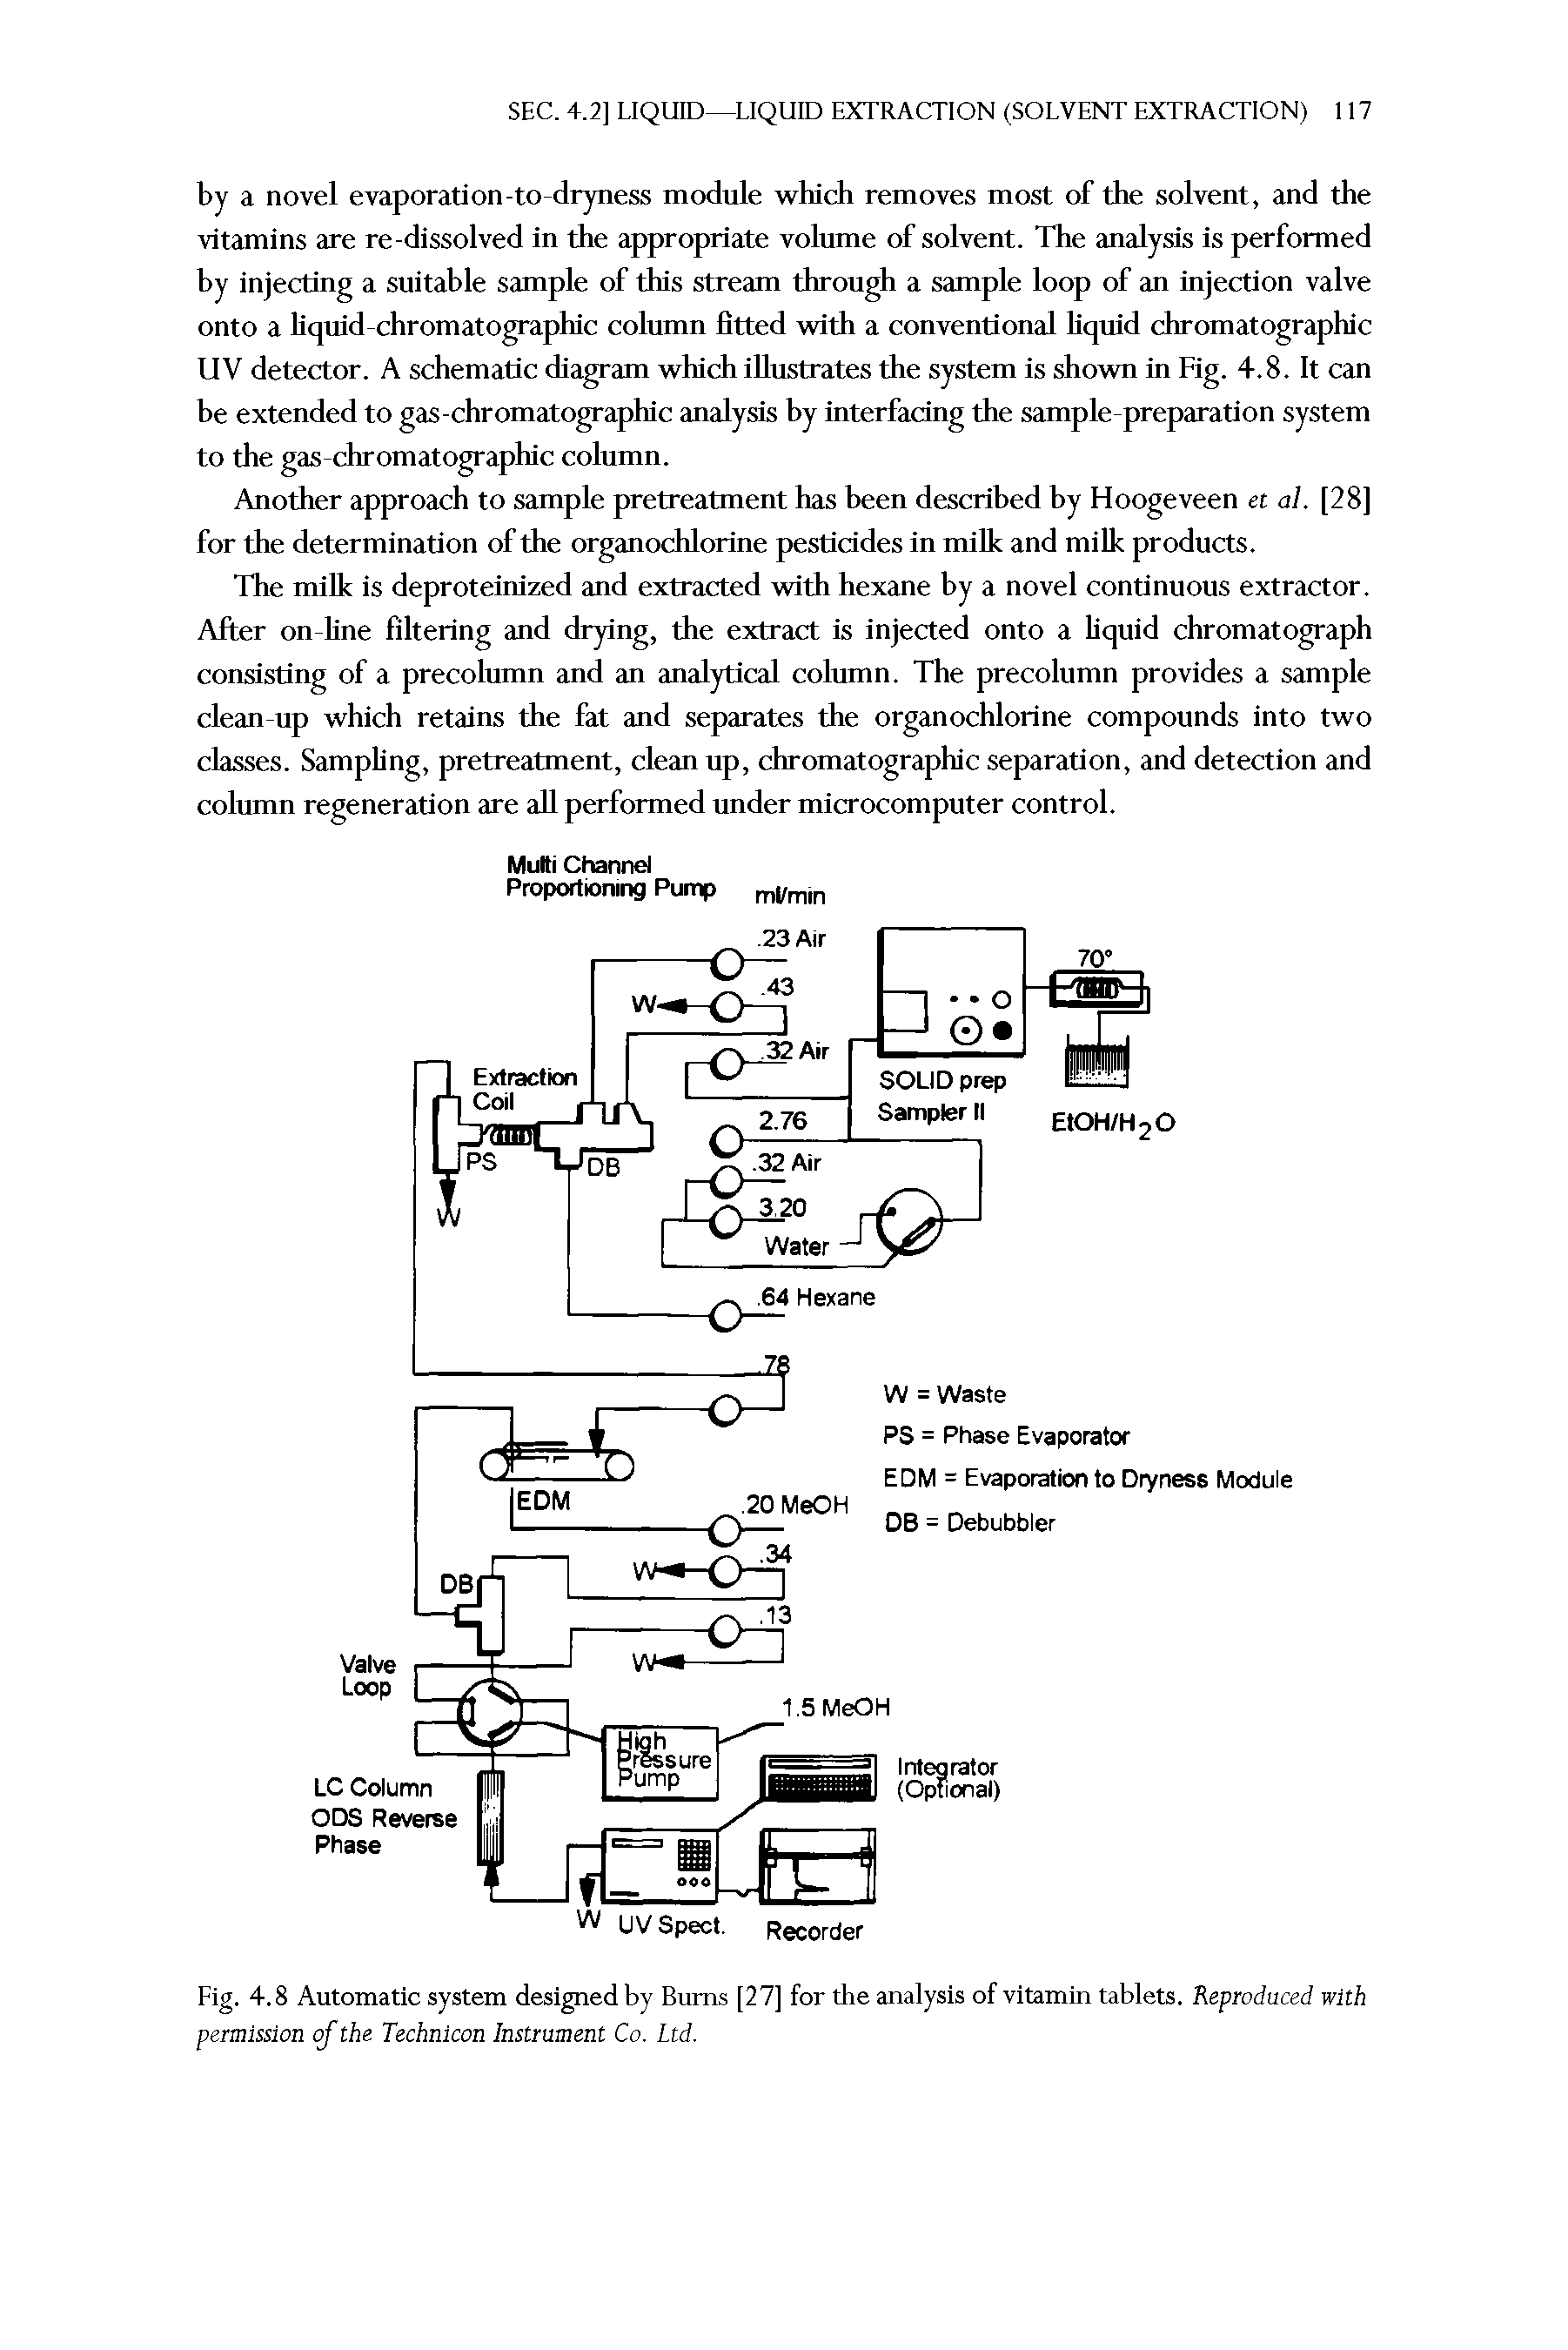 Fig. 4.8 Automatic system designed by Bums [27] for the analysis of vitamin tablets. Reproduced with permission of the Technicon Instrument Co. Ltd.